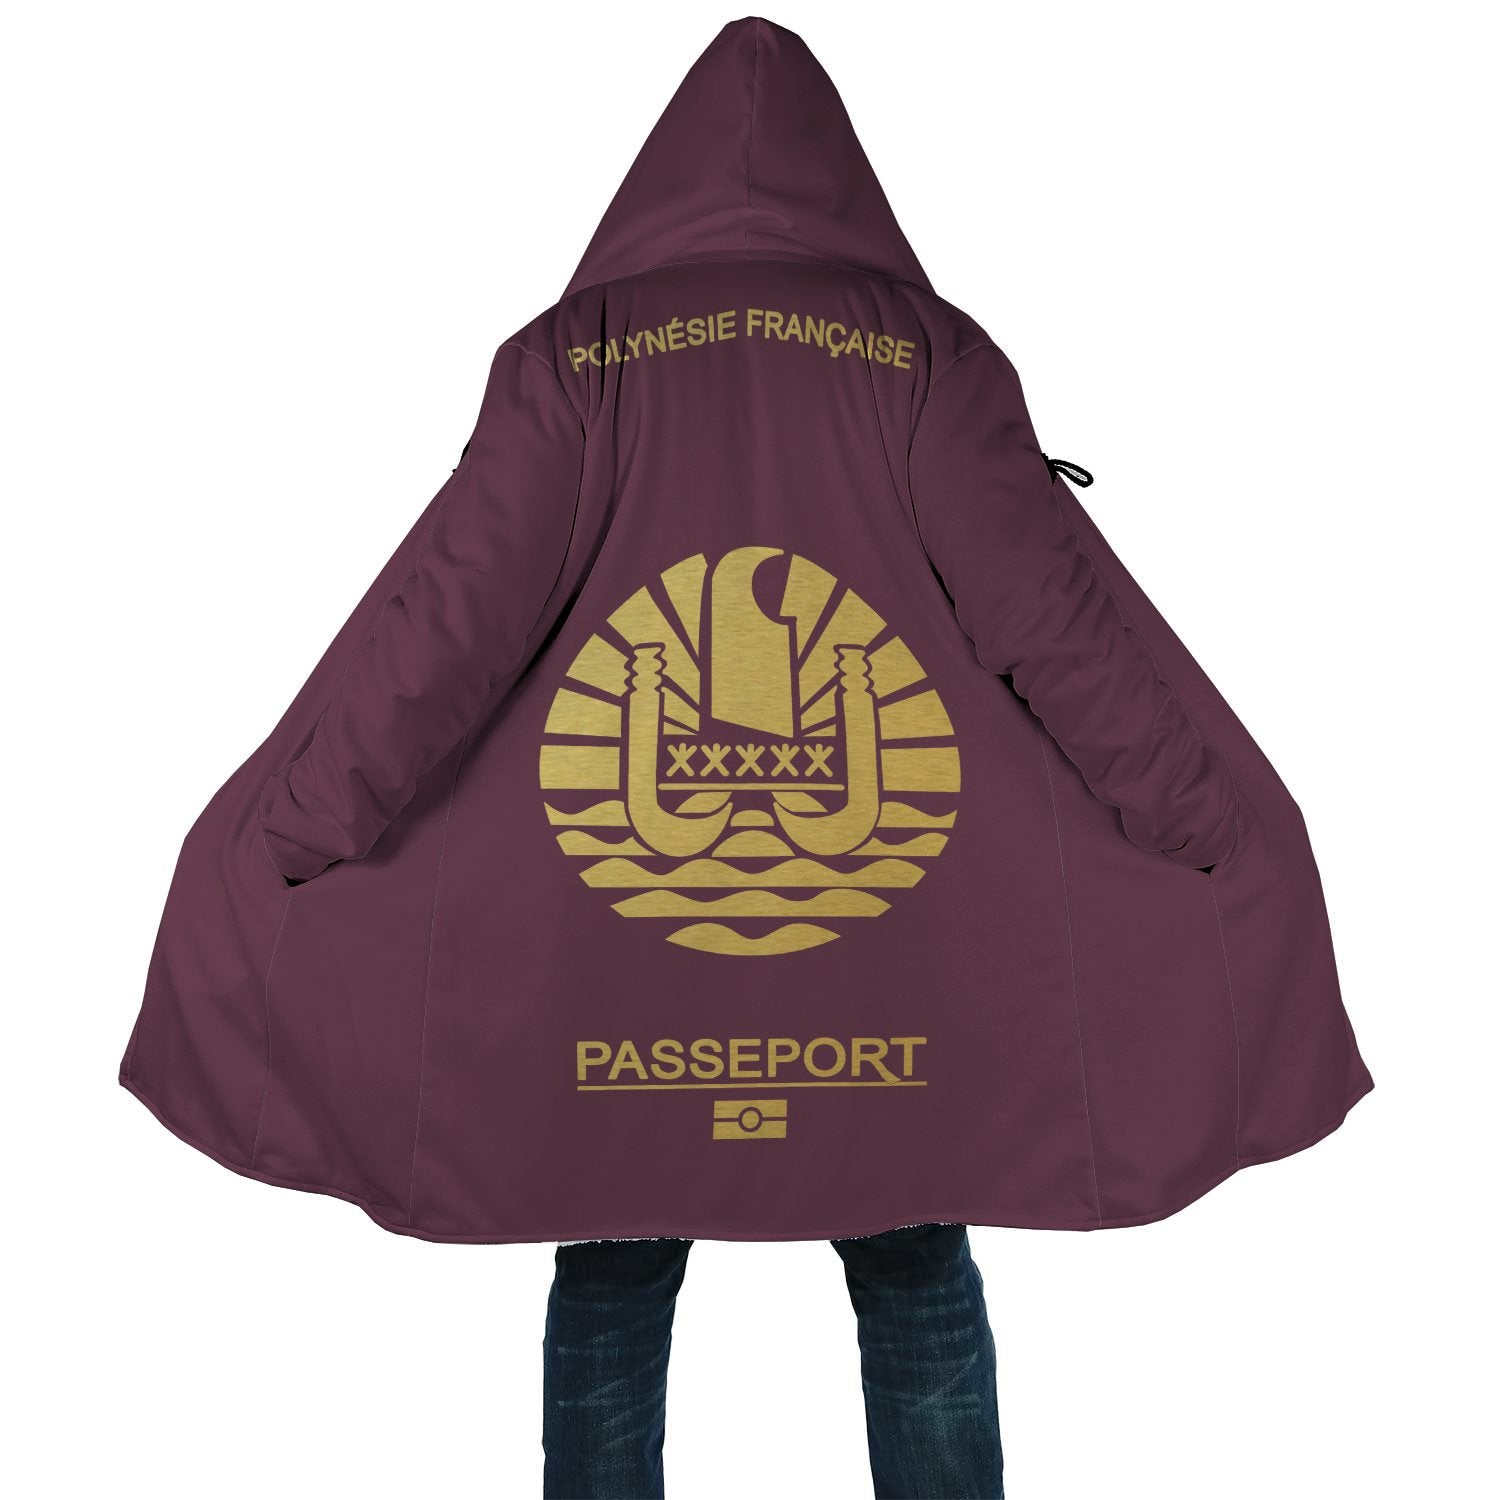 French Polynesia All Over Print Cloak - Passport Version Unisex Red & Gold - Polynesian Pride